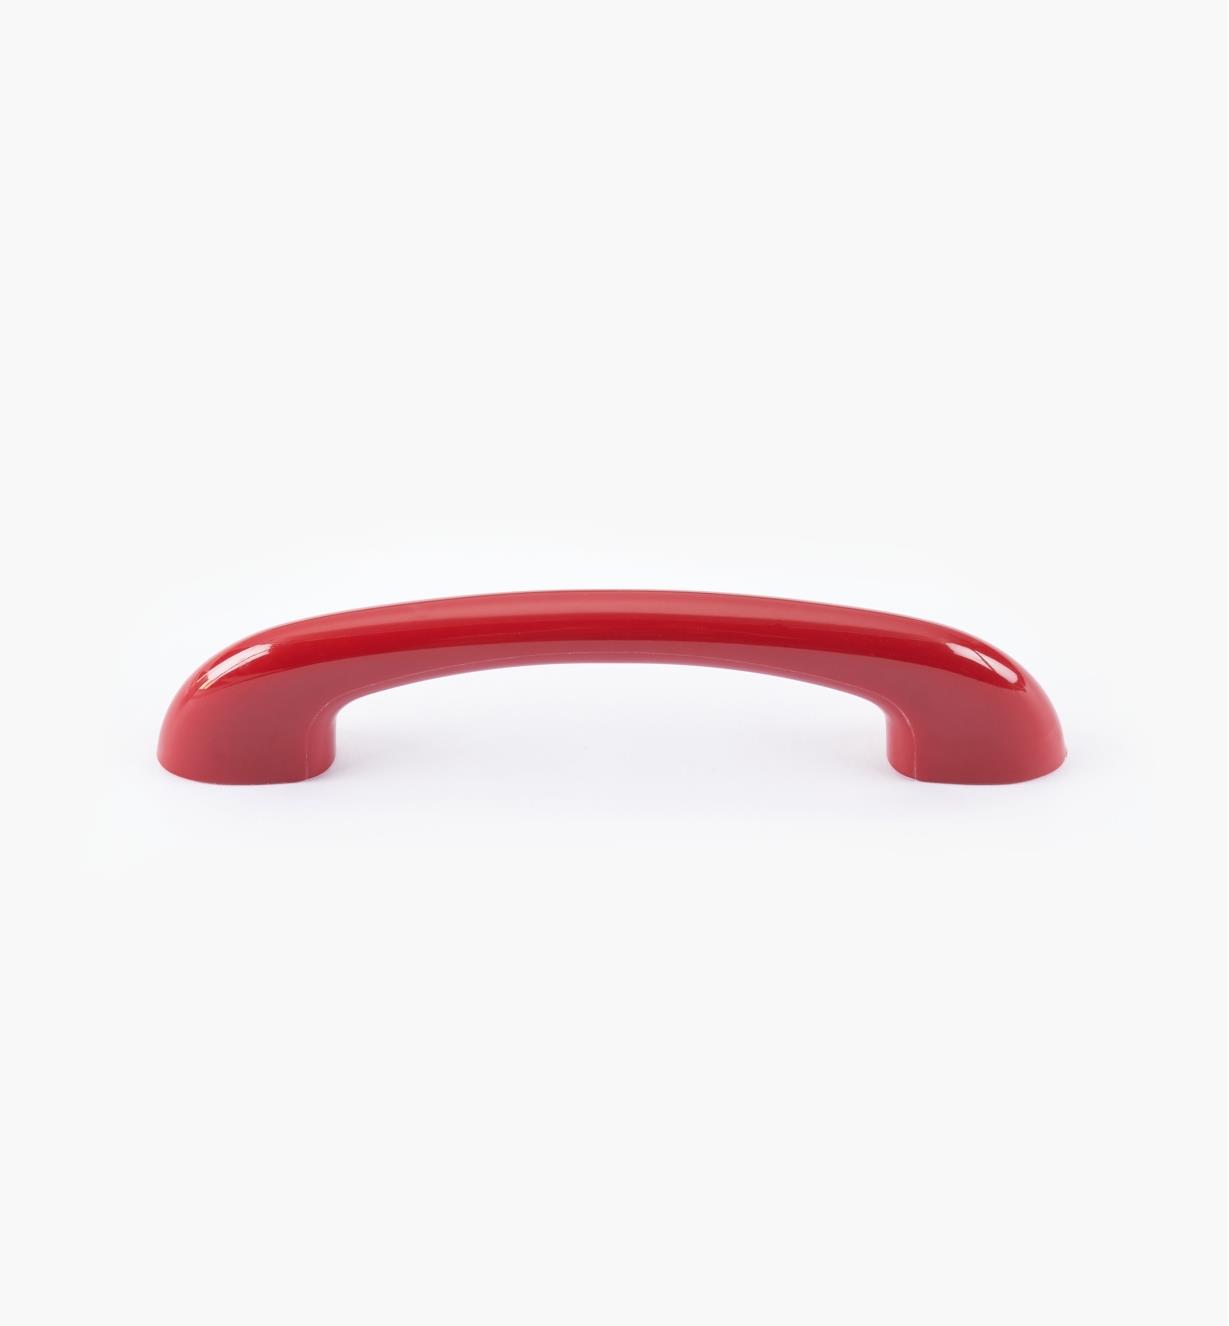 00W3511 - Red Handle